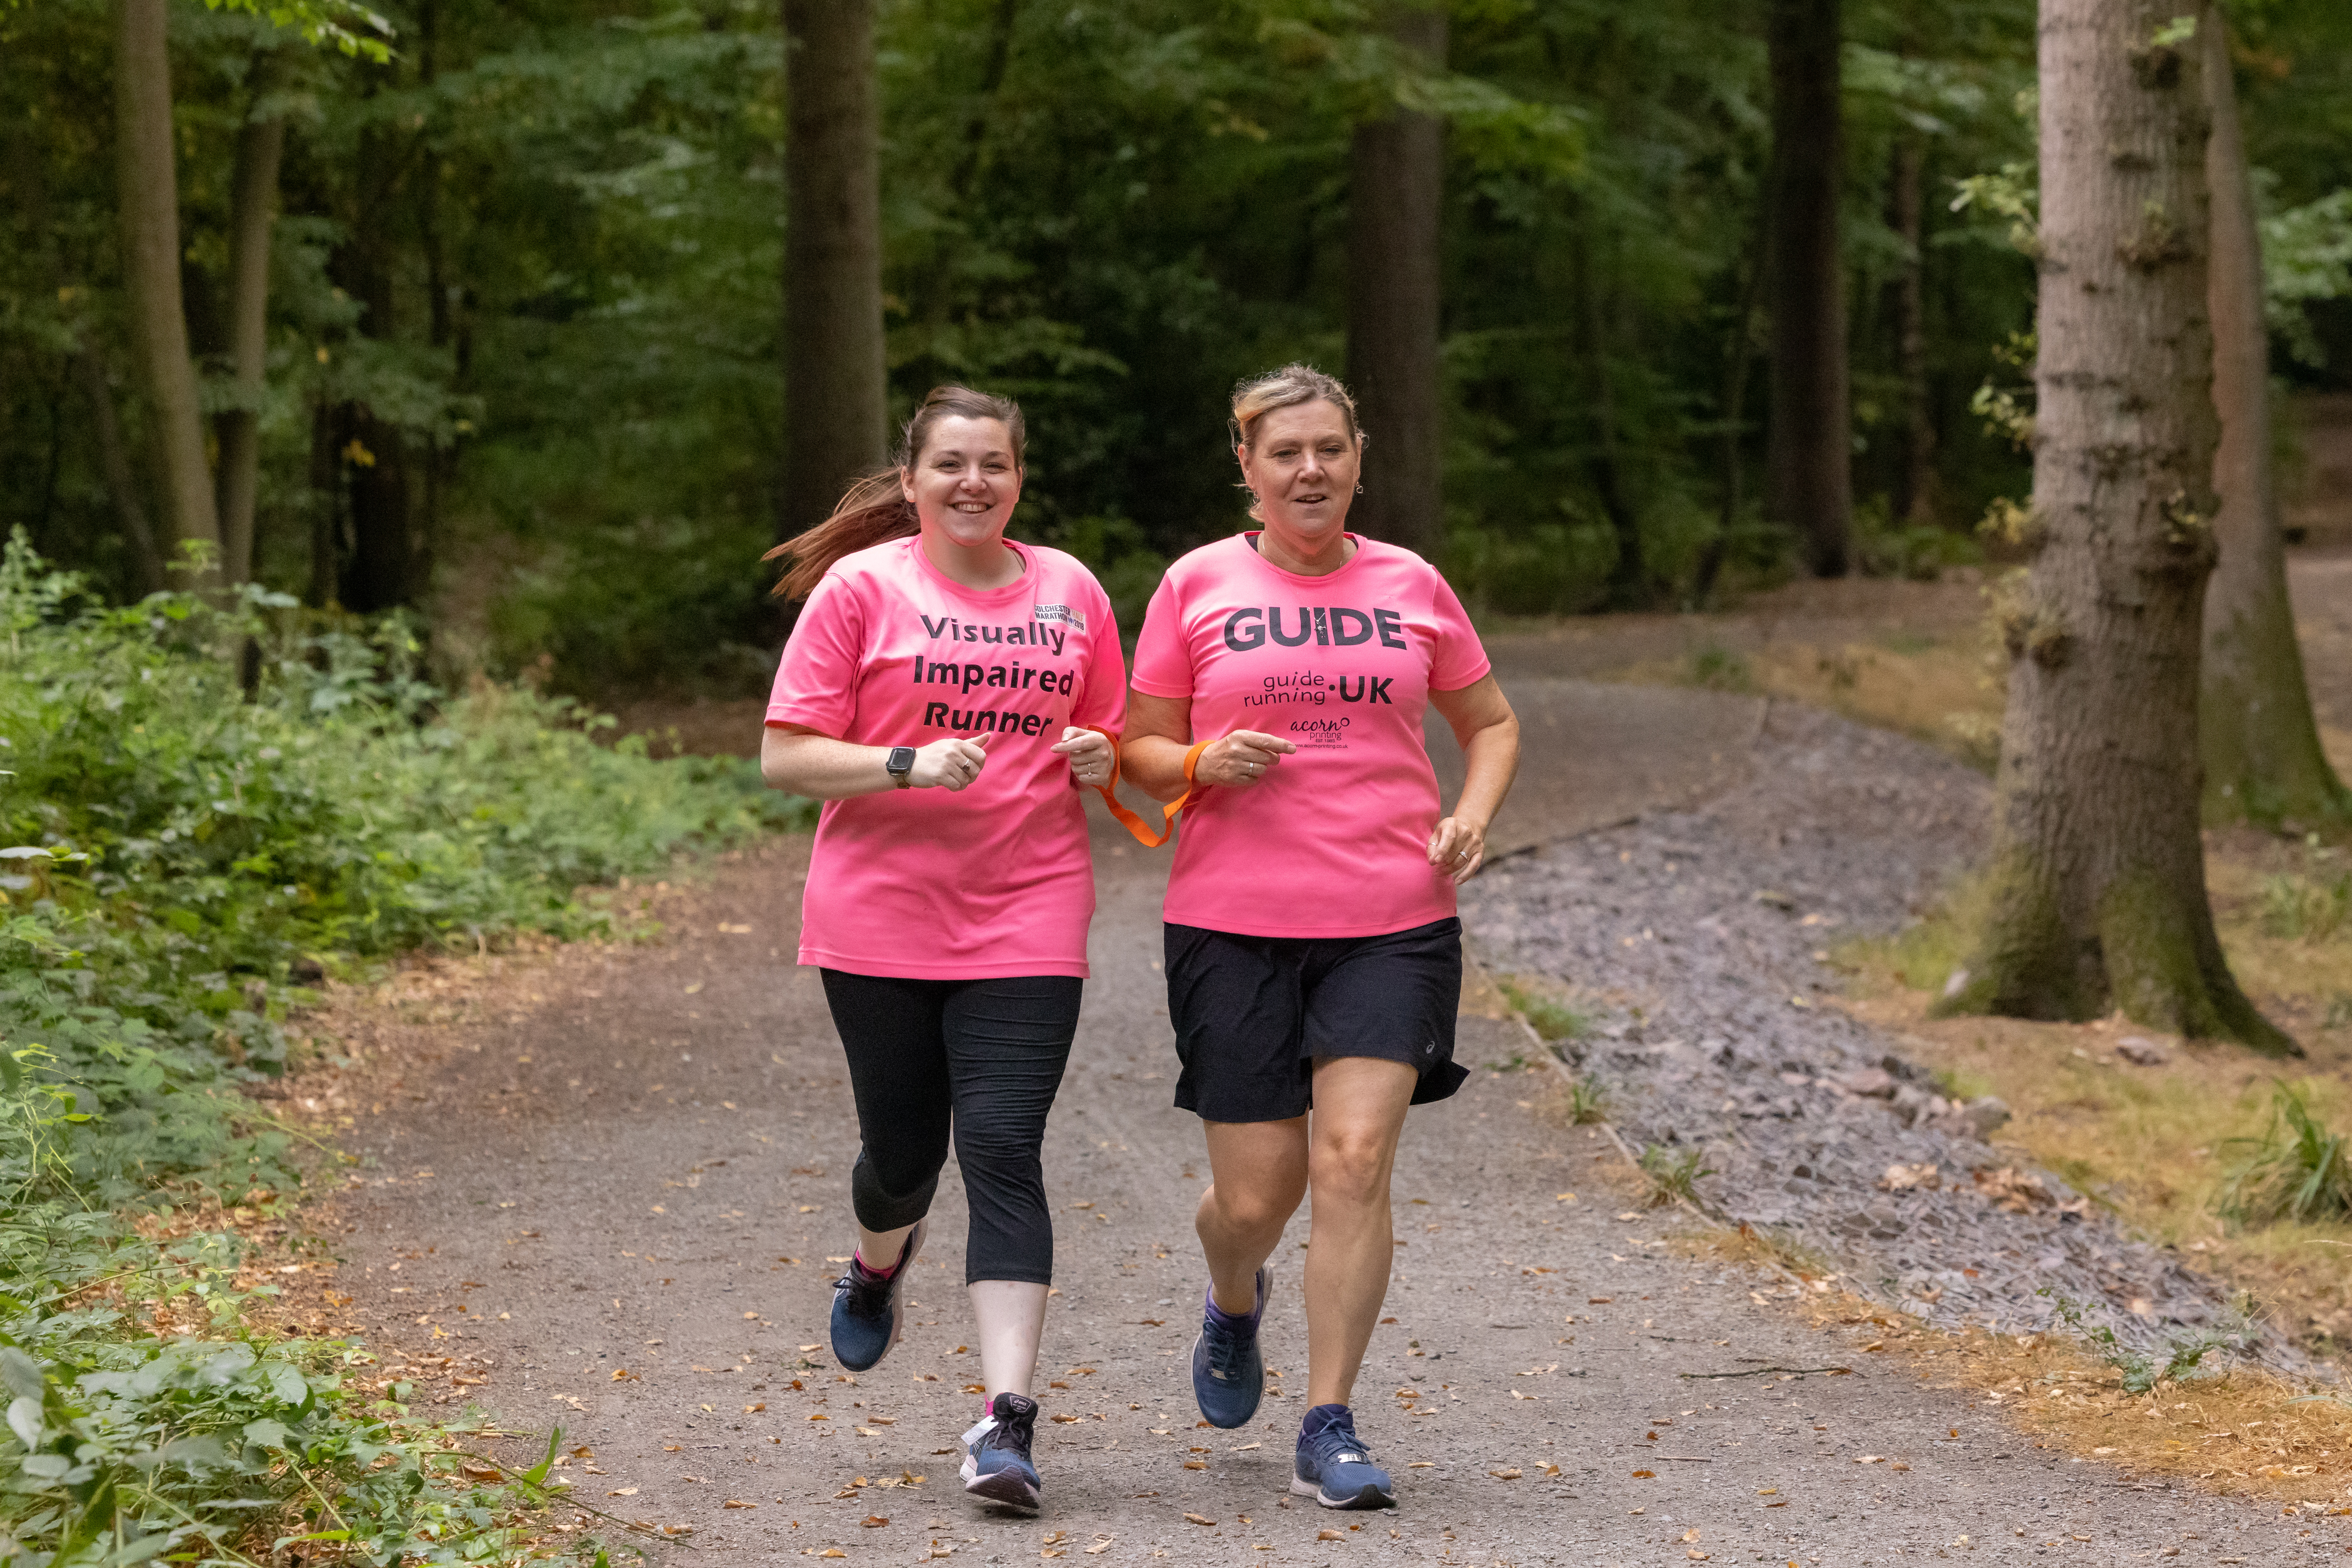 Samantha and Linda are running together through woods. They are both wearing pink t-shirts; Samantha's t-shirt says 'visually impaired runner' and Linda's t-shirt says 'Guide runner'